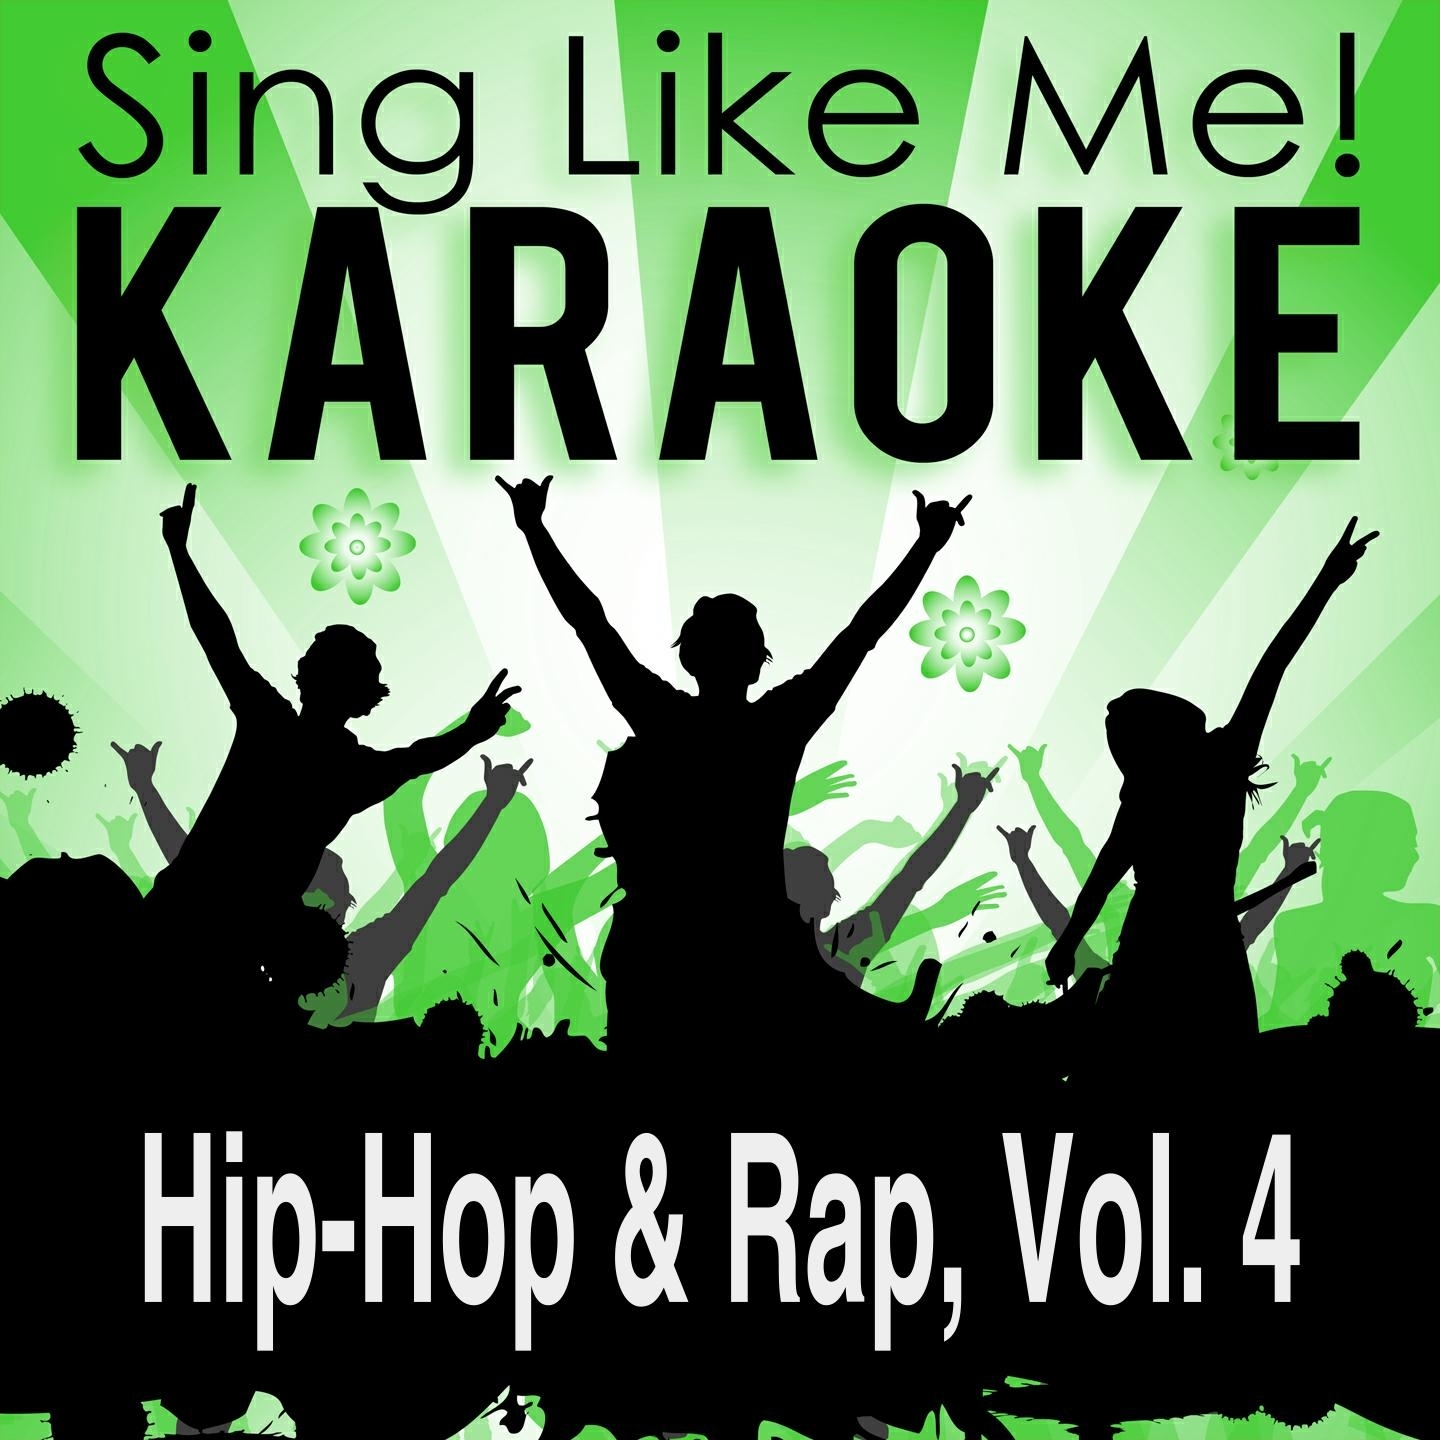 Change Clothes (Karaoke Version With Guide Melody) (Originally Performed By Jay-Z)